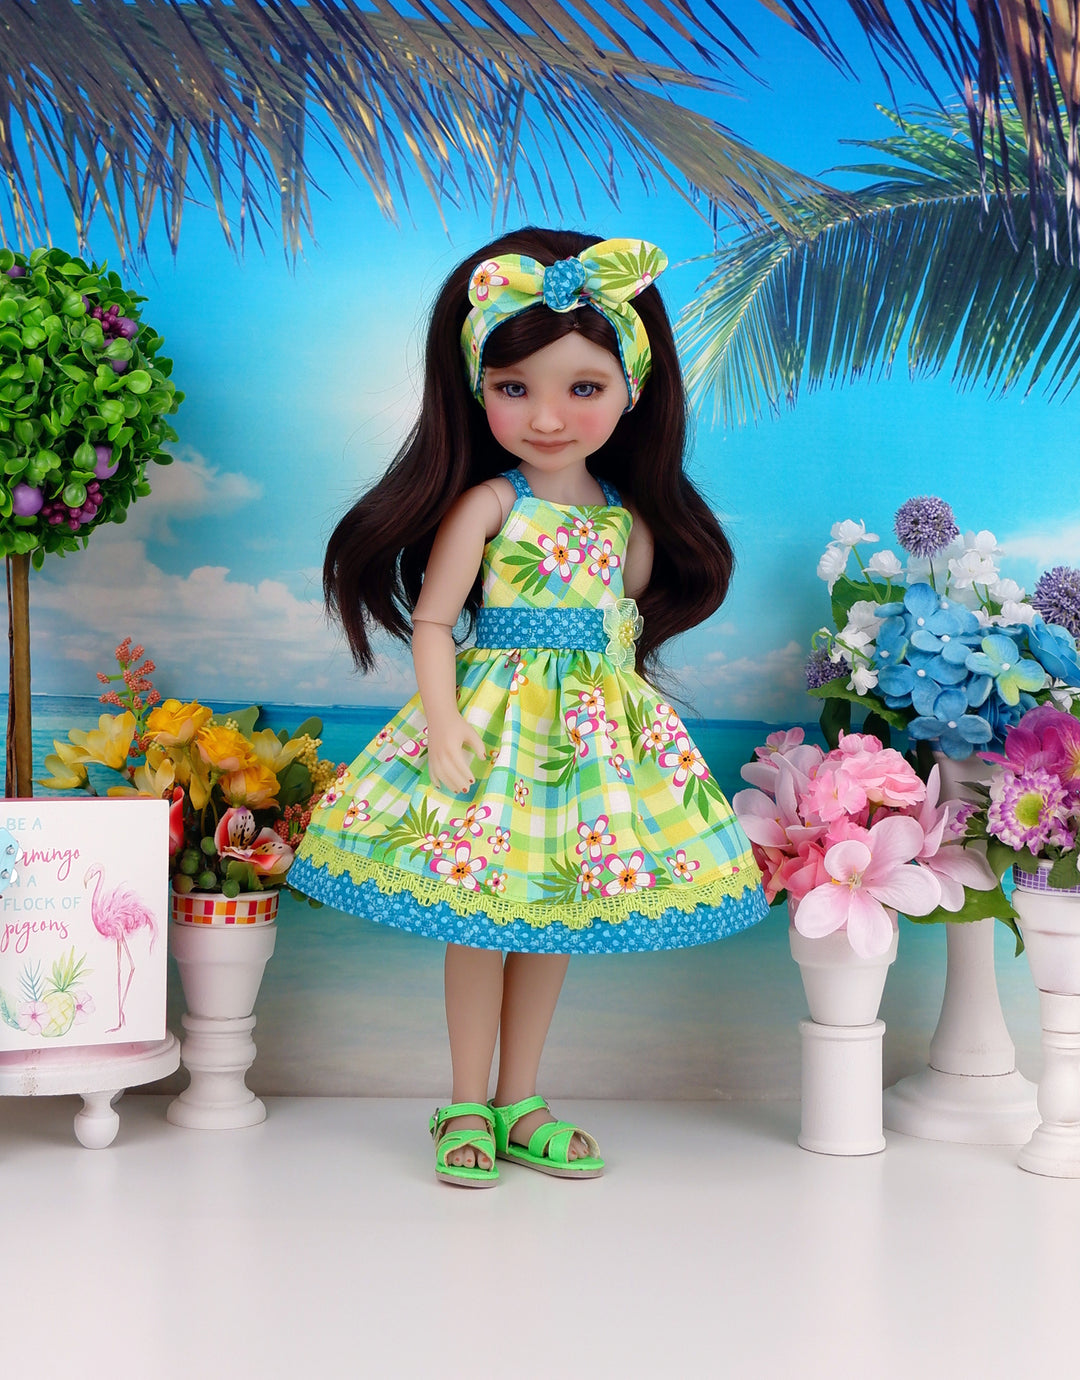 Tropic Plaid - dress and sandals for Ruby Red Fashion Friends doll